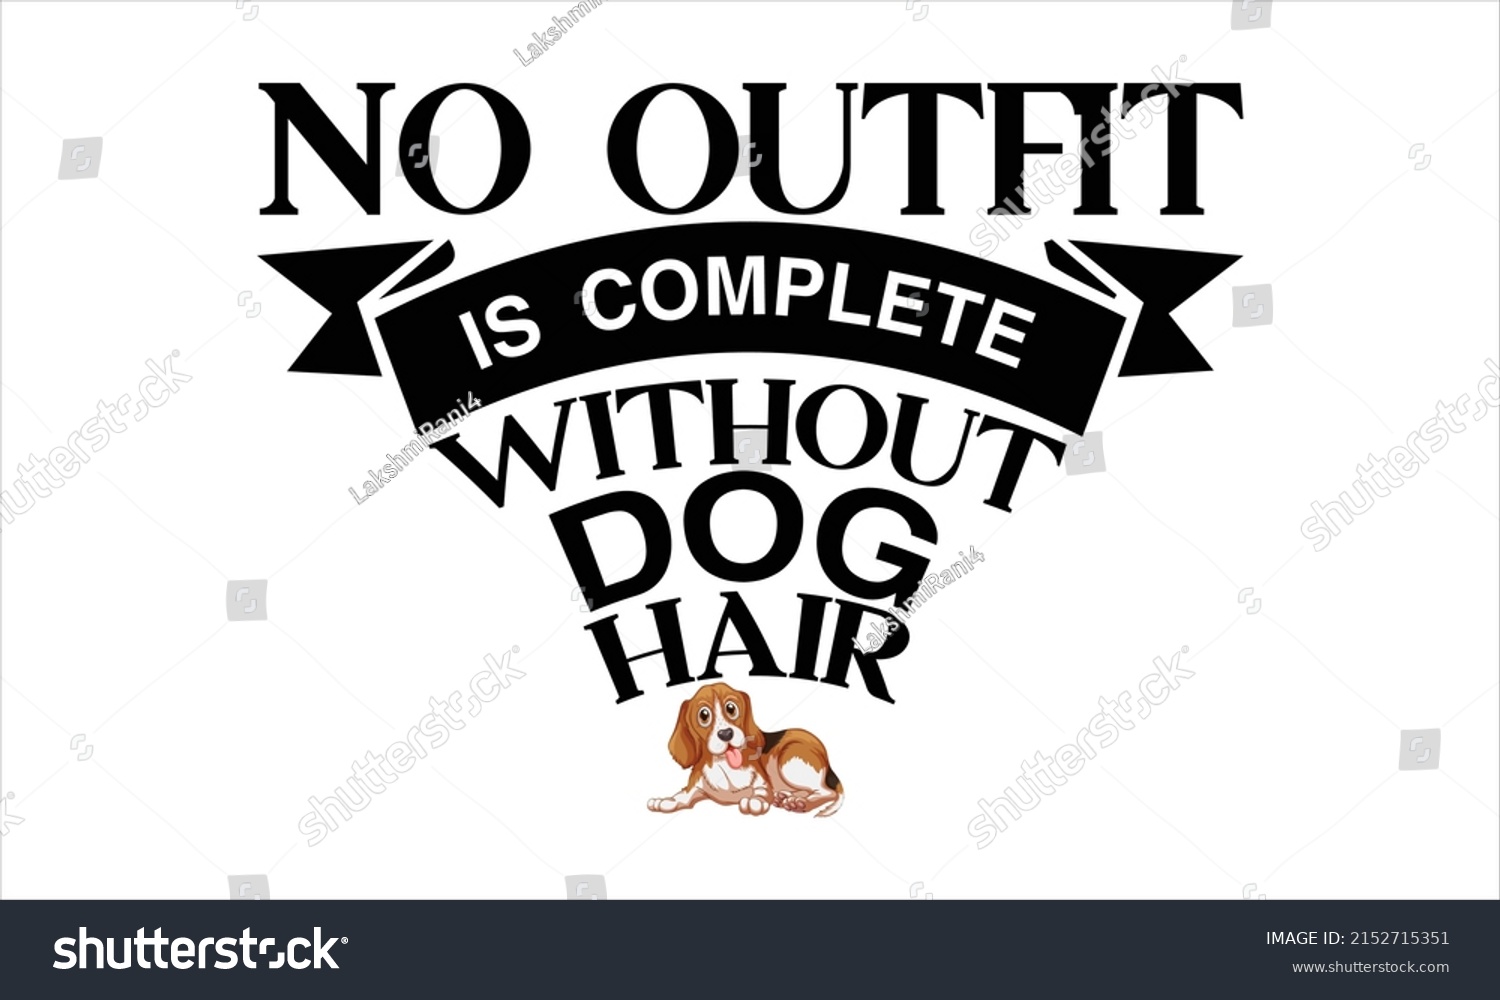 SVG of No outfit is complete without dog hair  -   Lettering design for greeting banners, Mouse Pads, Prints, Cards and Posters, Mugs, Notebooks, Floor Pillows and T-shirt prints design.
 svg